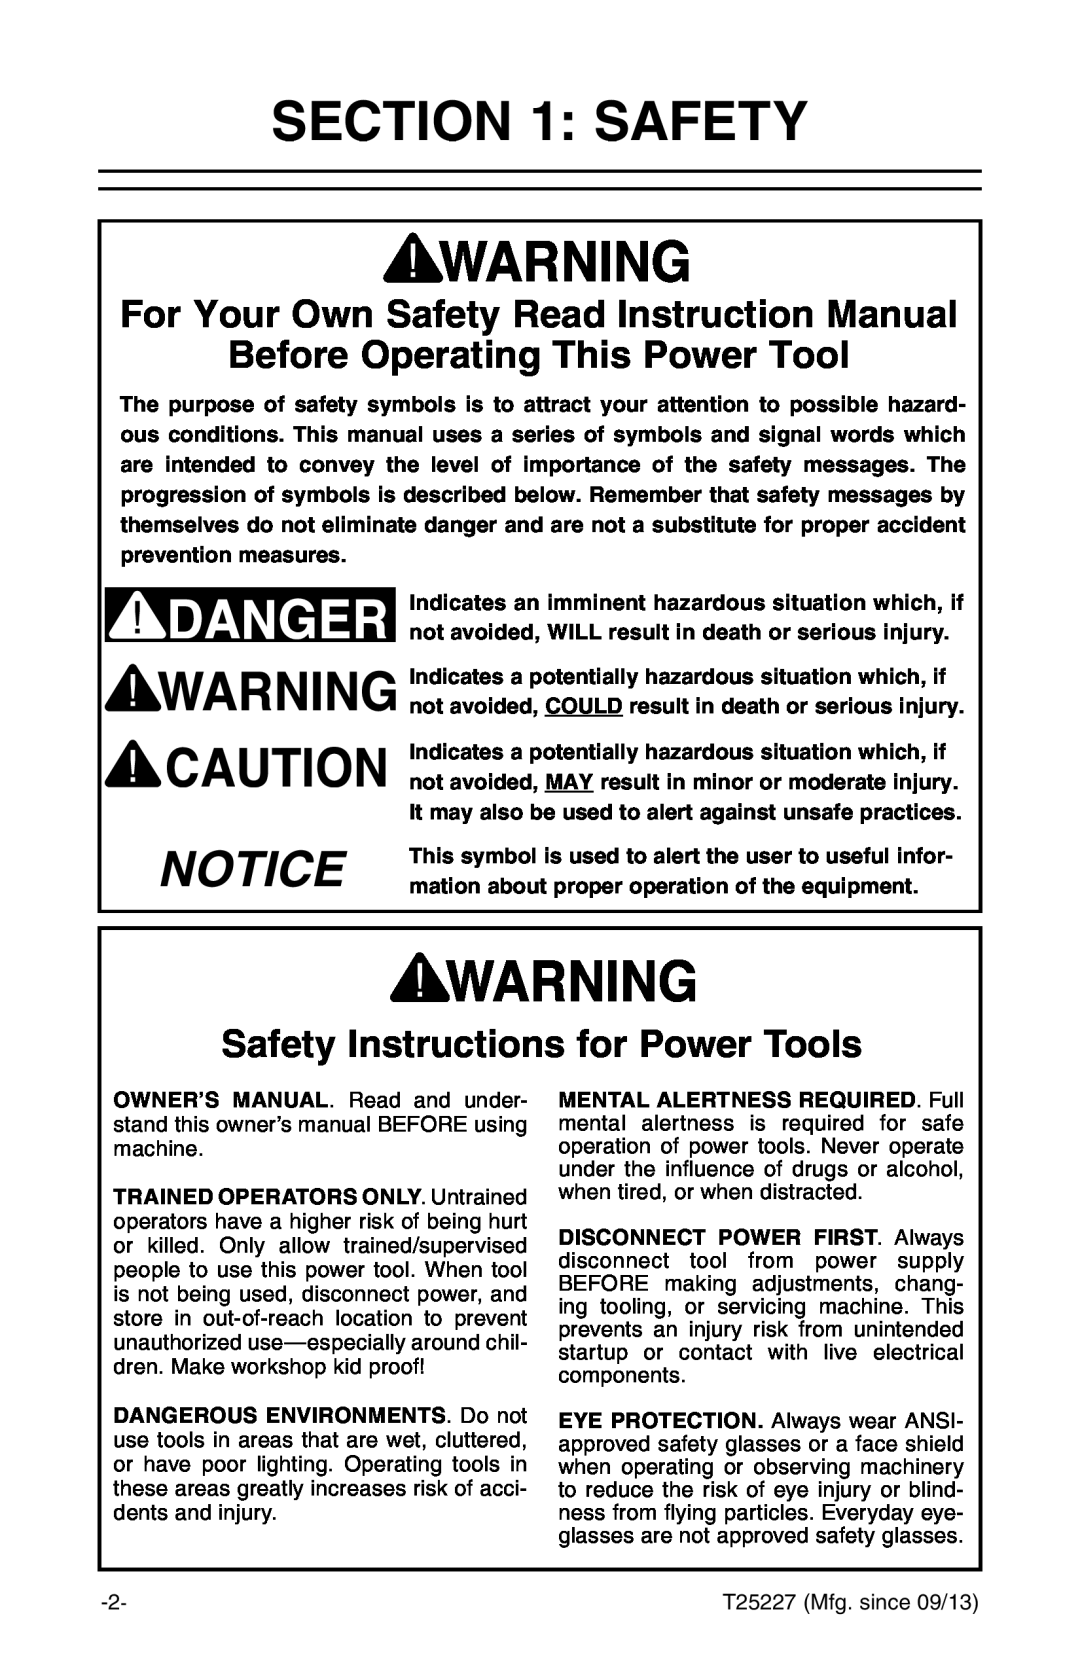 Grizzly T25227 owner manual Before Operating This Power Tool, Safety Instructions for Power Tools 